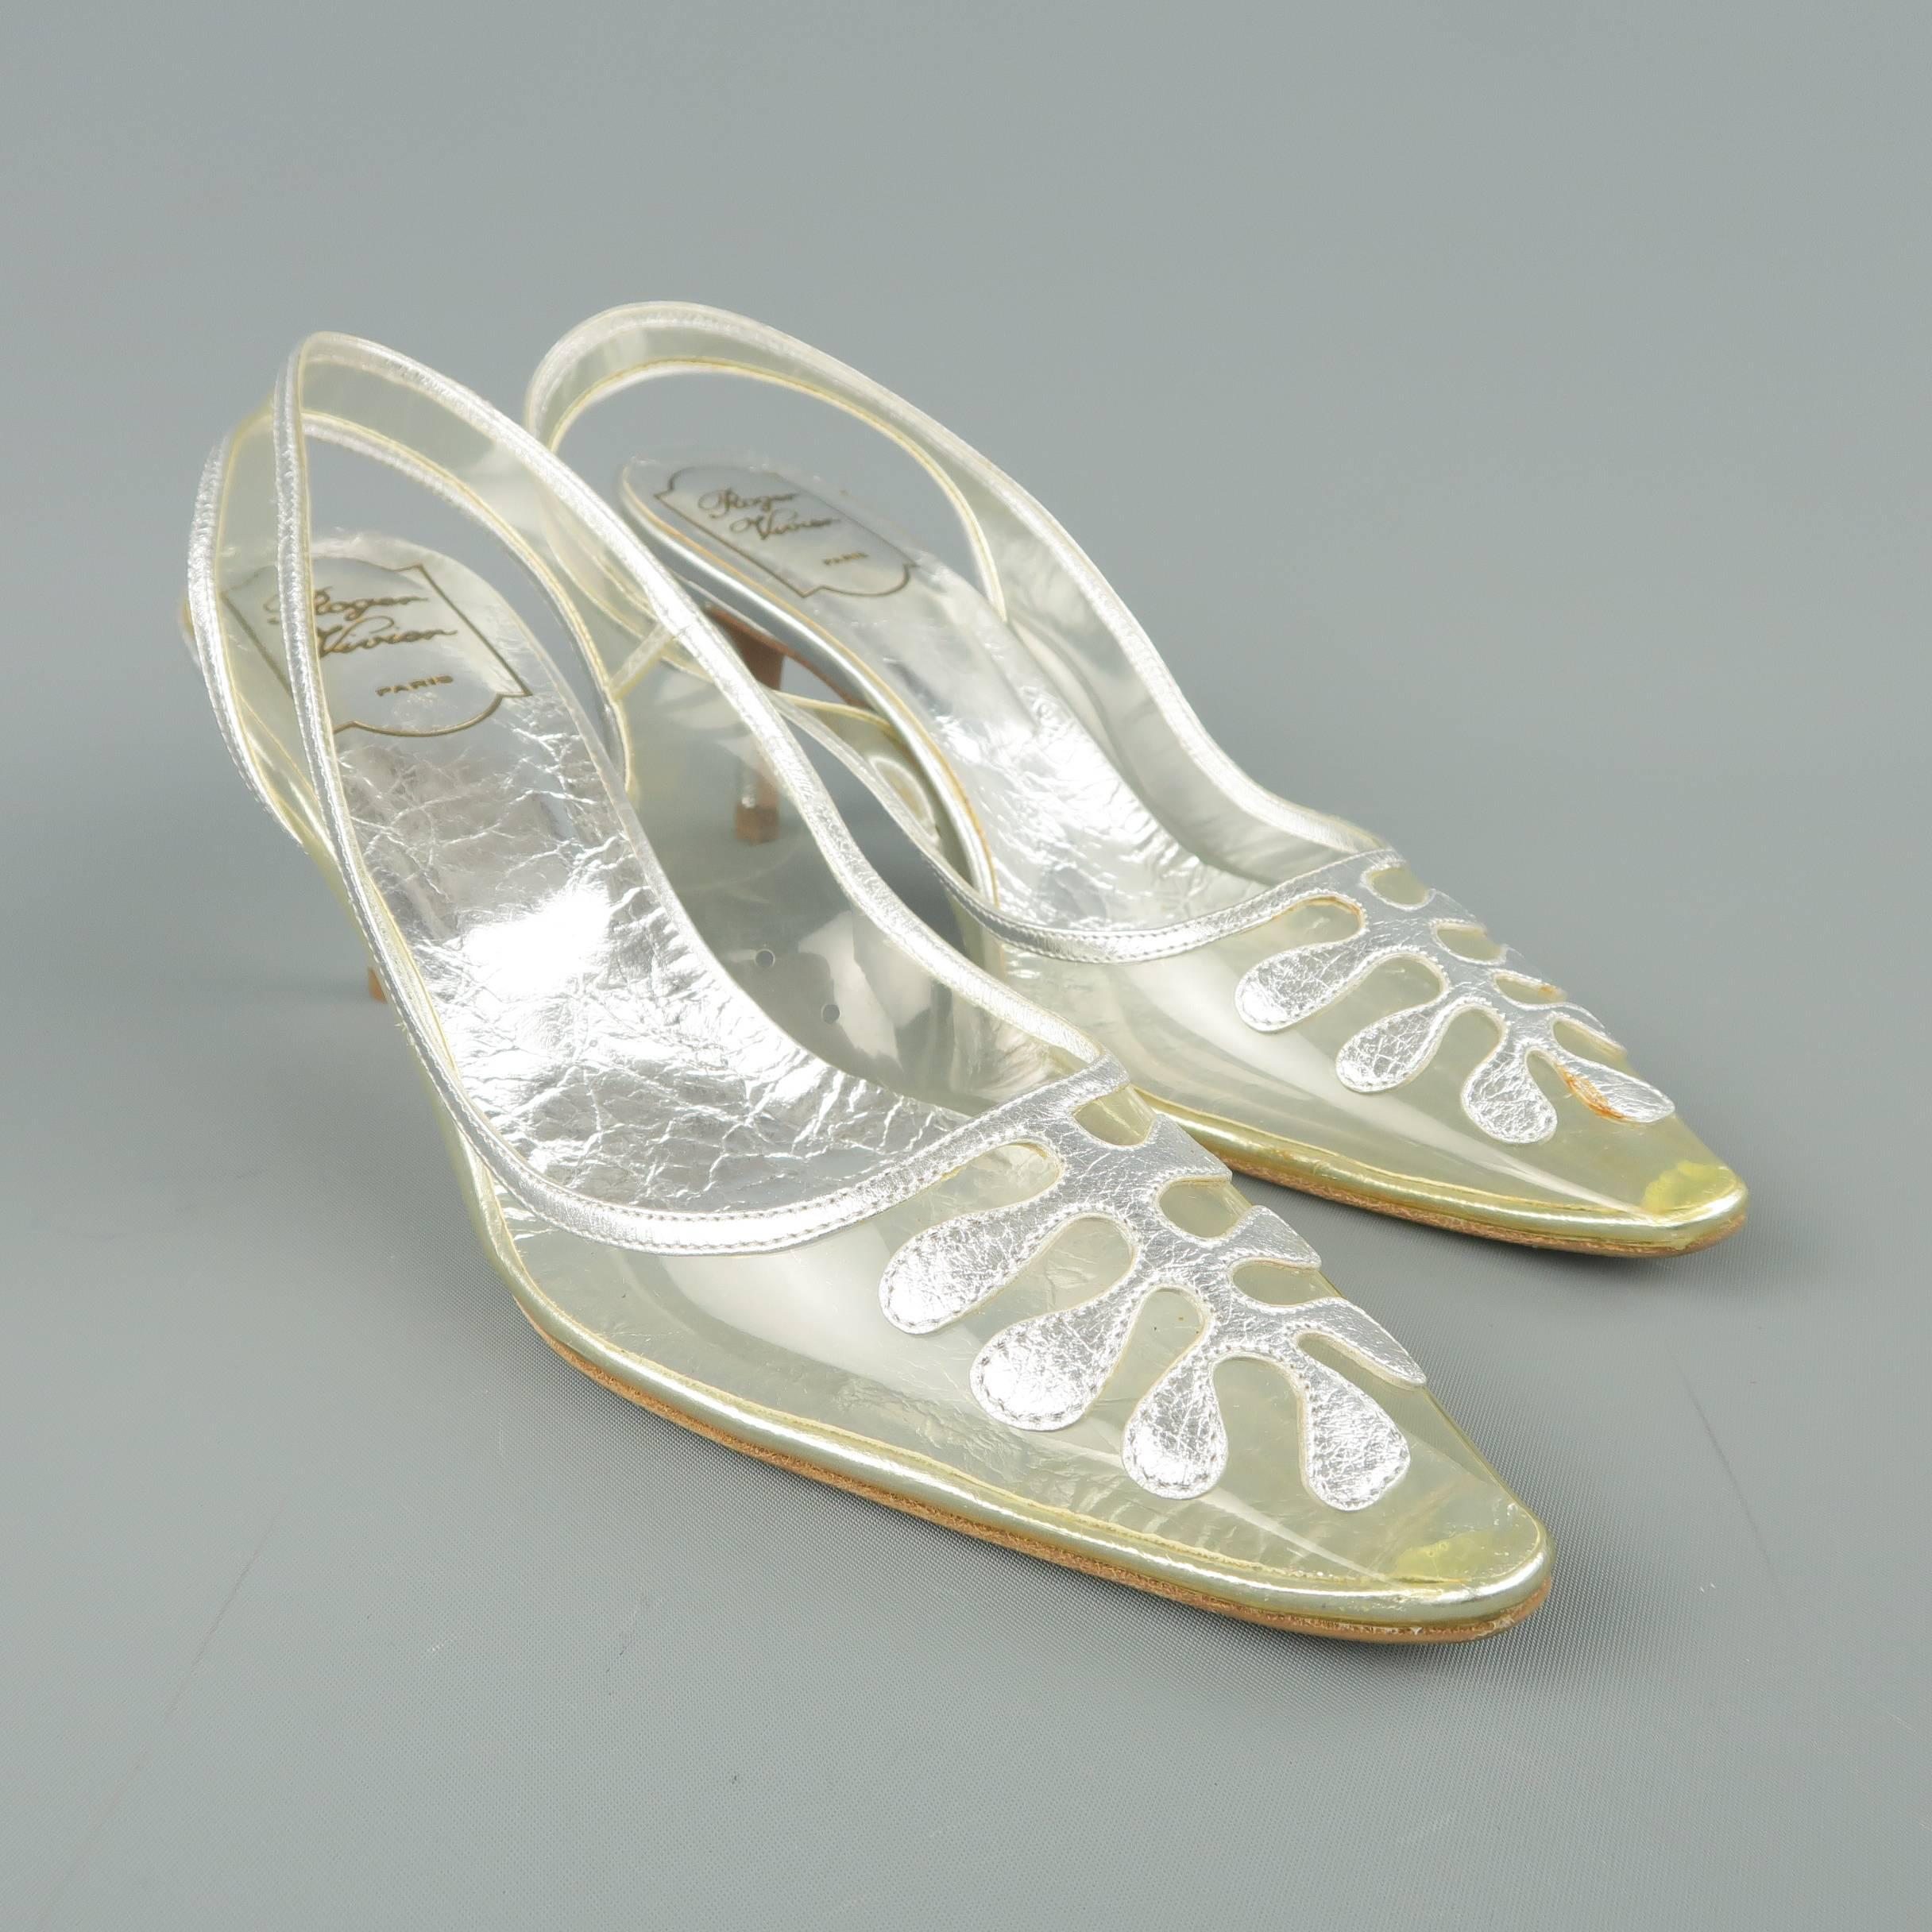 Vintage ROGER VIVIER pumps come in clear pvc with a pointed toe, metallic silver leather piping and design, and covered stiletto heel. Never worn. Minor aging to vinyl and discolorations. As-is. With dust bags. Made in Italy.
 
New With Defects. IT